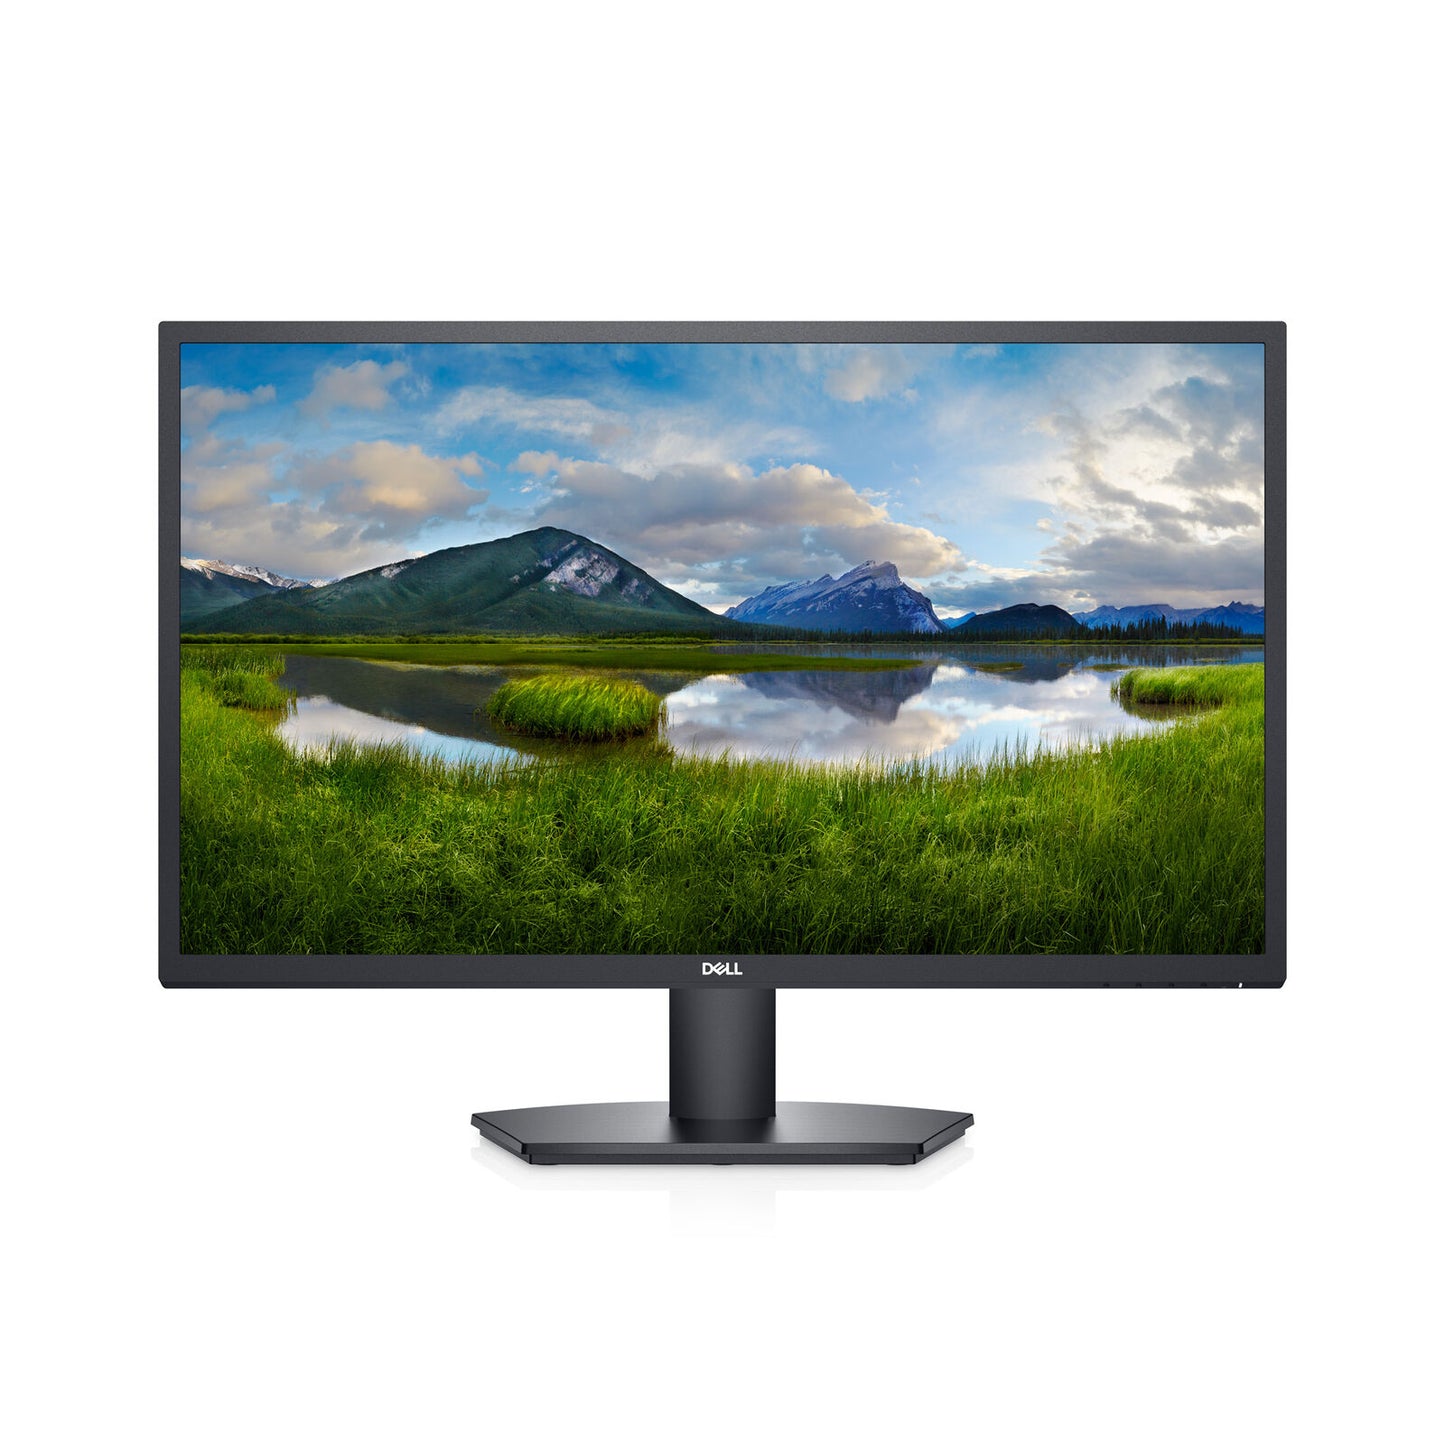 DELL SE2722H FULL HD LED 27IN MONITOR